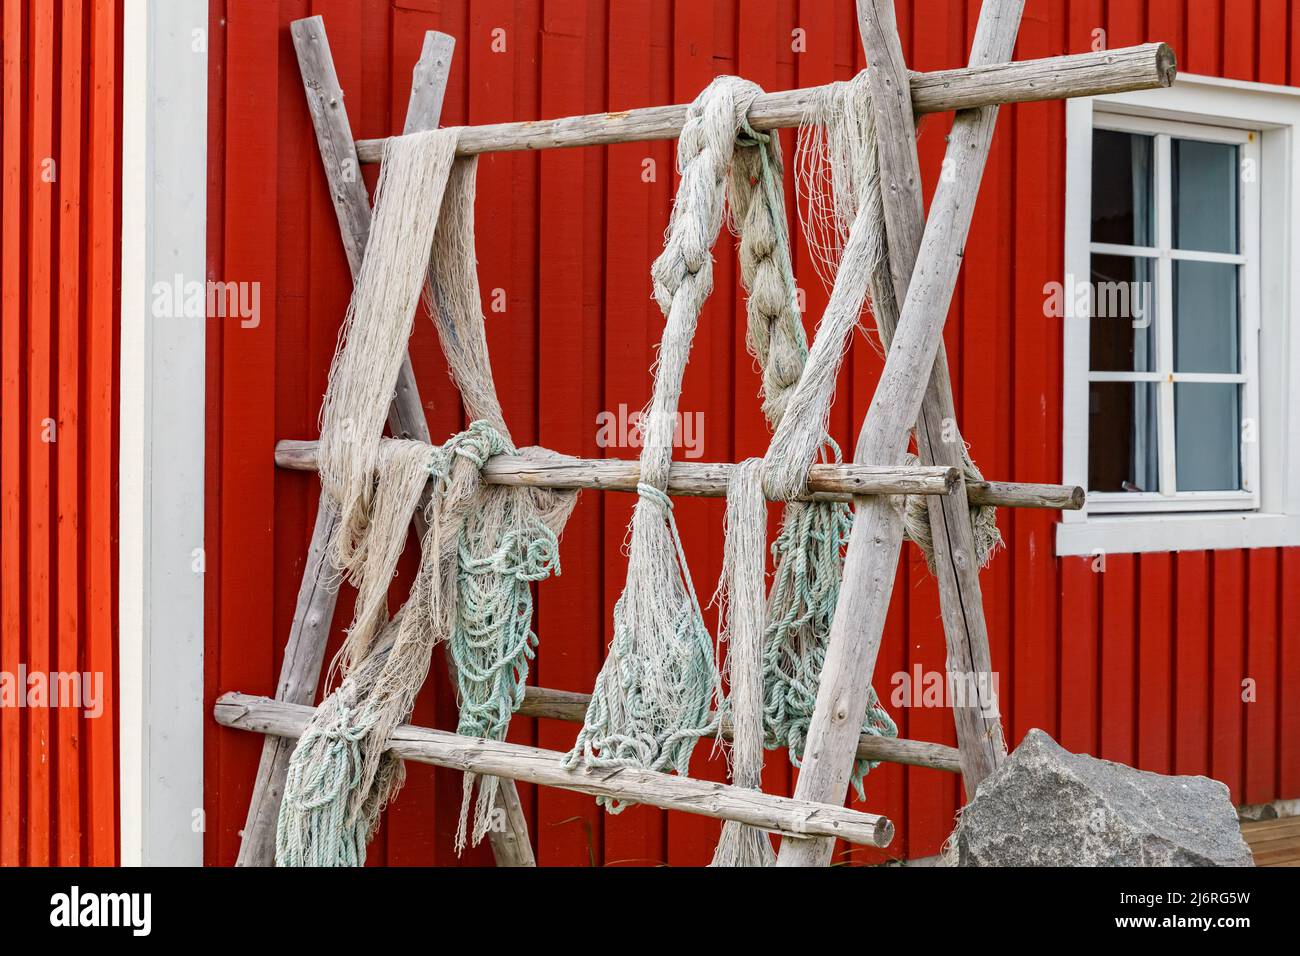 Lofoten islands, fishing nets hanging on the fence or porch, classic Norwegian landscape, house of red color, fishnets carefully picked Stock Photo